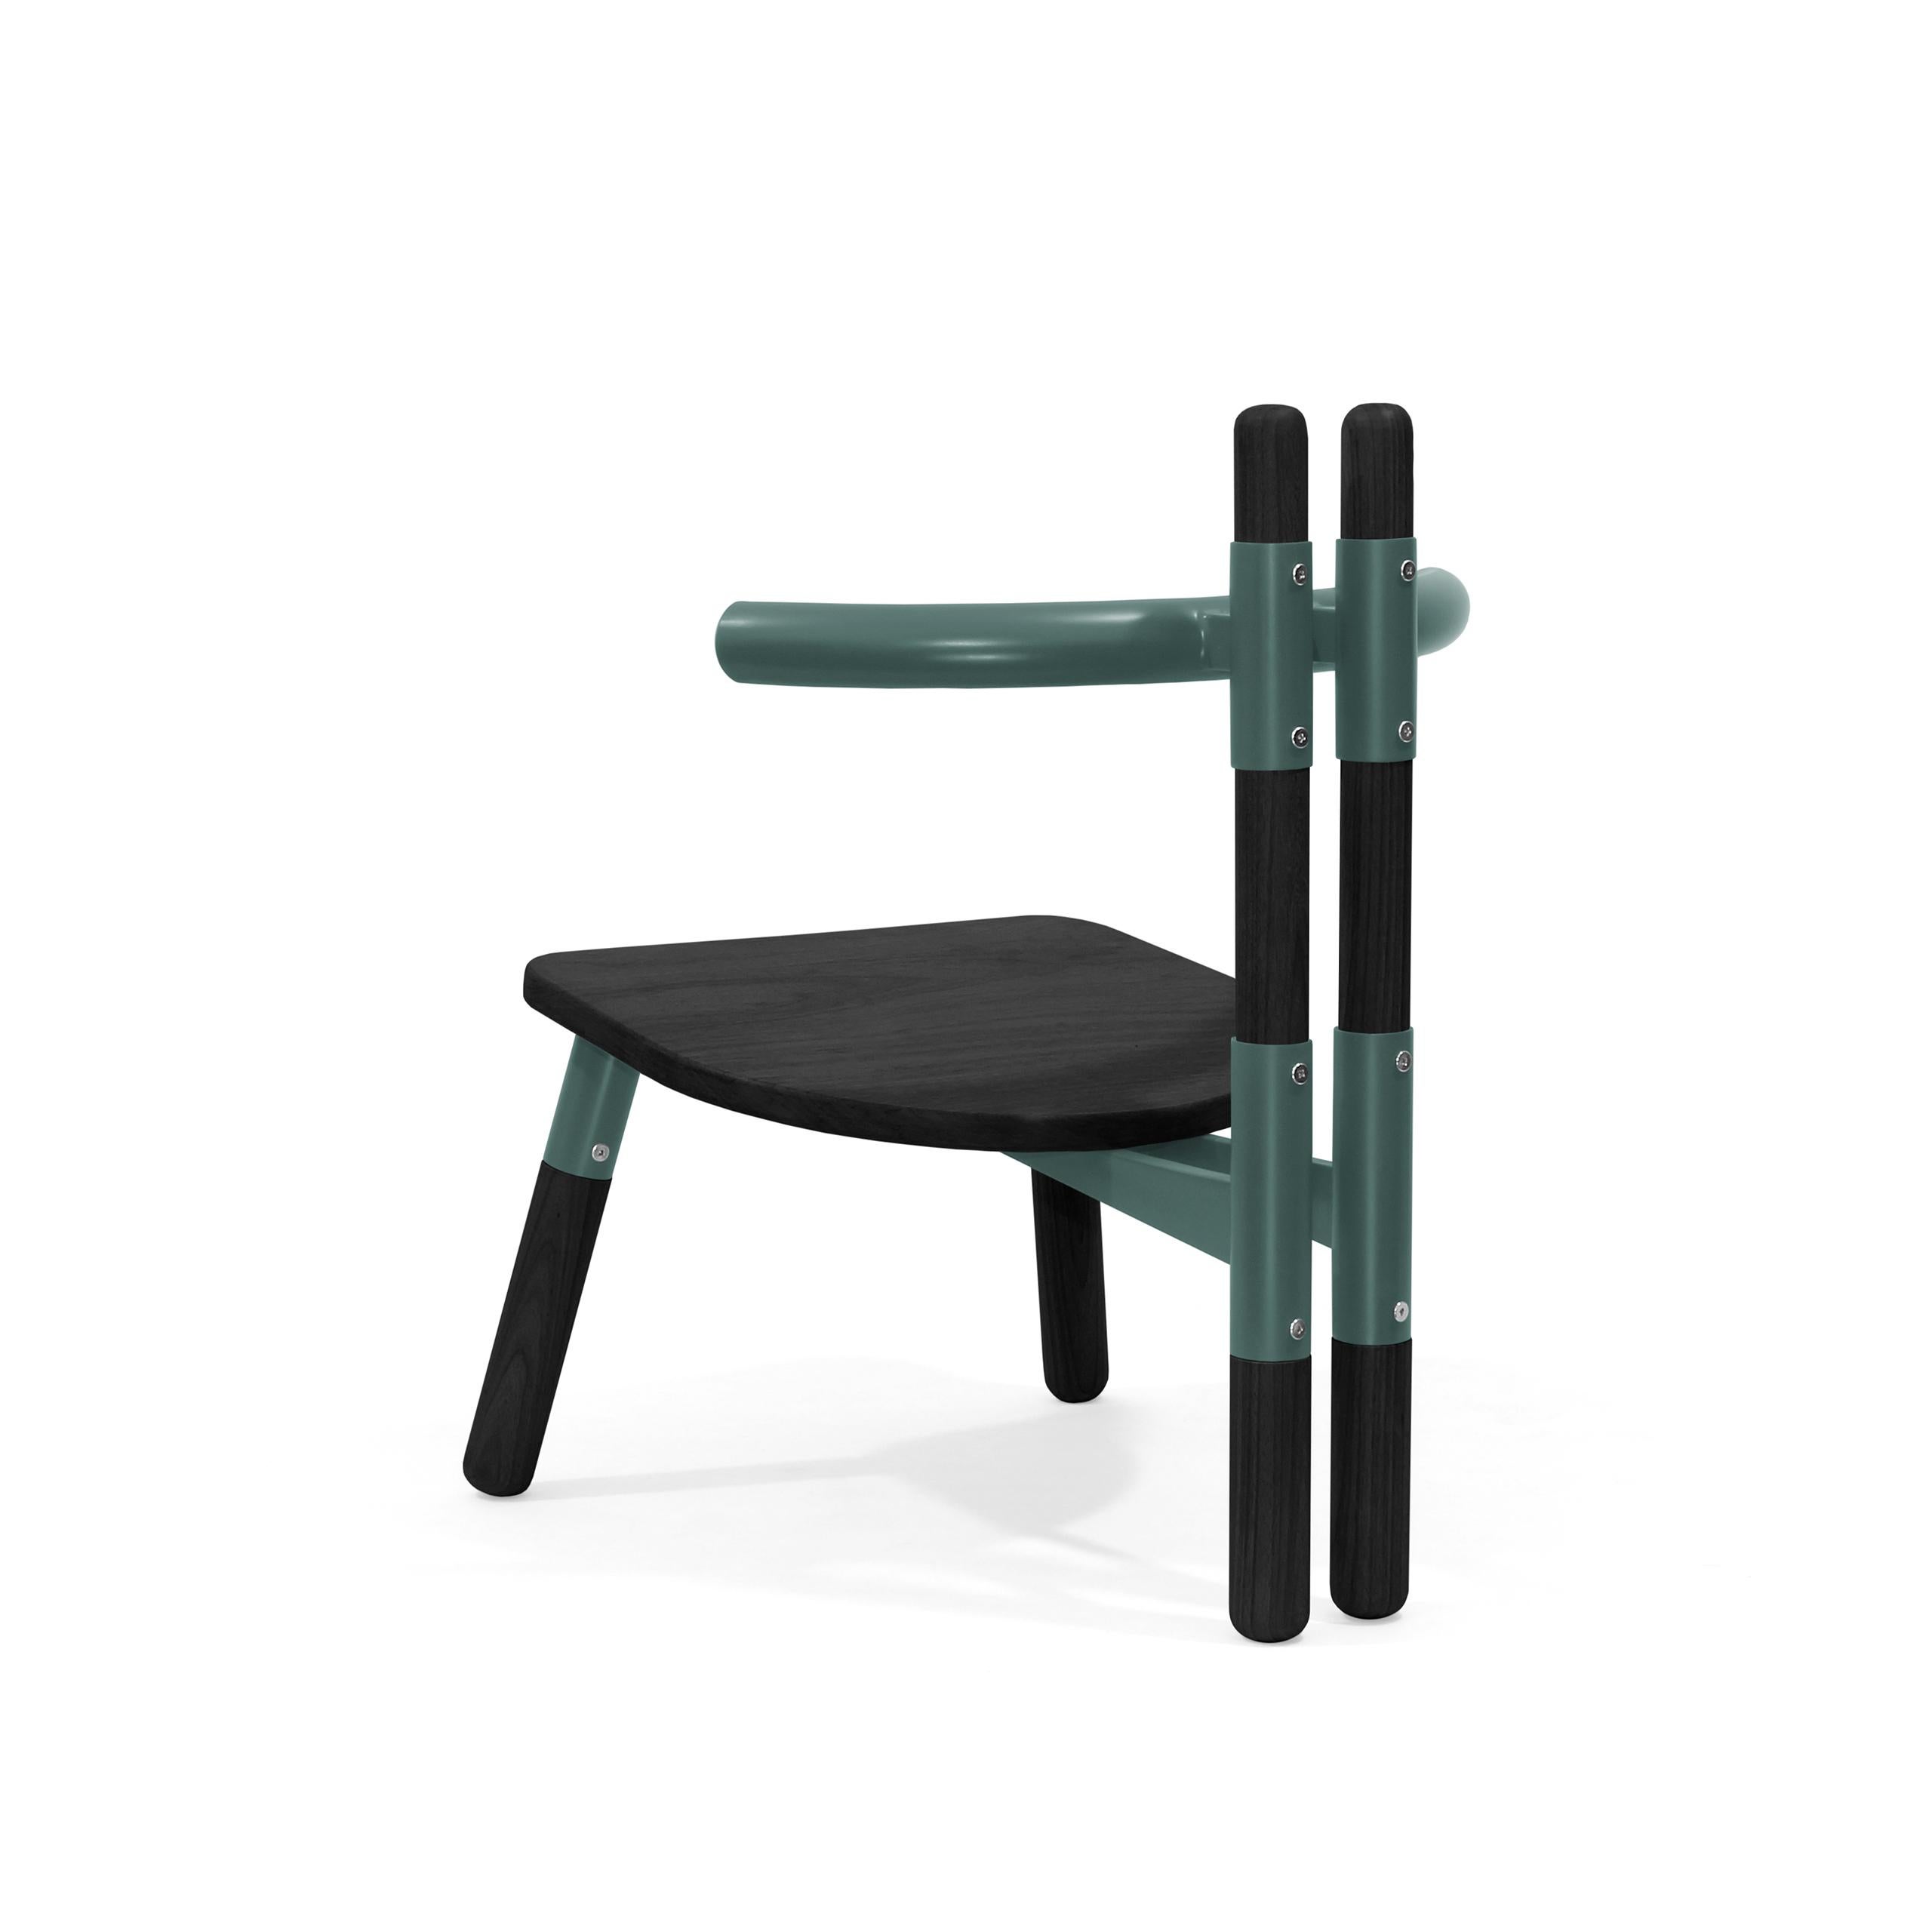 Handmade PK13 Armchair, Steel Structure and Ebonized Wood Legs by Paulo Kobylka In New Condition For Sale In Londrina, Paraná